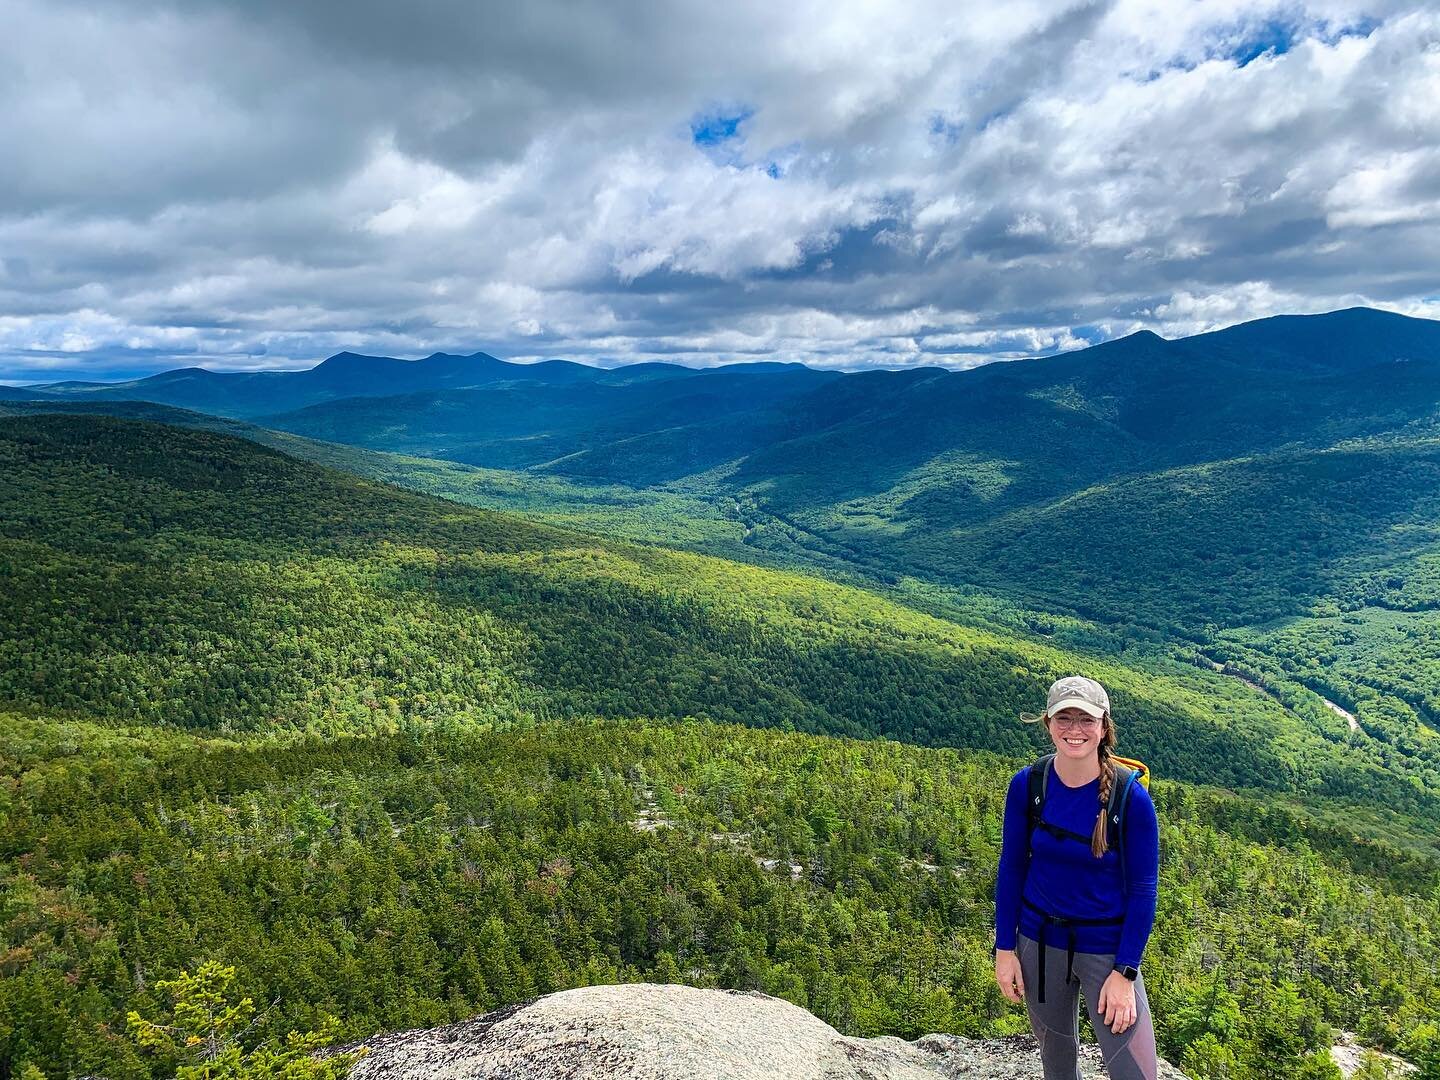 ⁣〰️It&rsquo;s the holiday weekend!〰️⠀
⠀
Who&rsquo;s getting outside this weekend? Whether it&rsquo;s climbing a mountain ⛰or basking in the sun🌞 with a White Claw, I hope it&rsquo;s filled with smiles and laughter. 🙃⠀
⠀
📍Welsh-Dickey Loop, NH